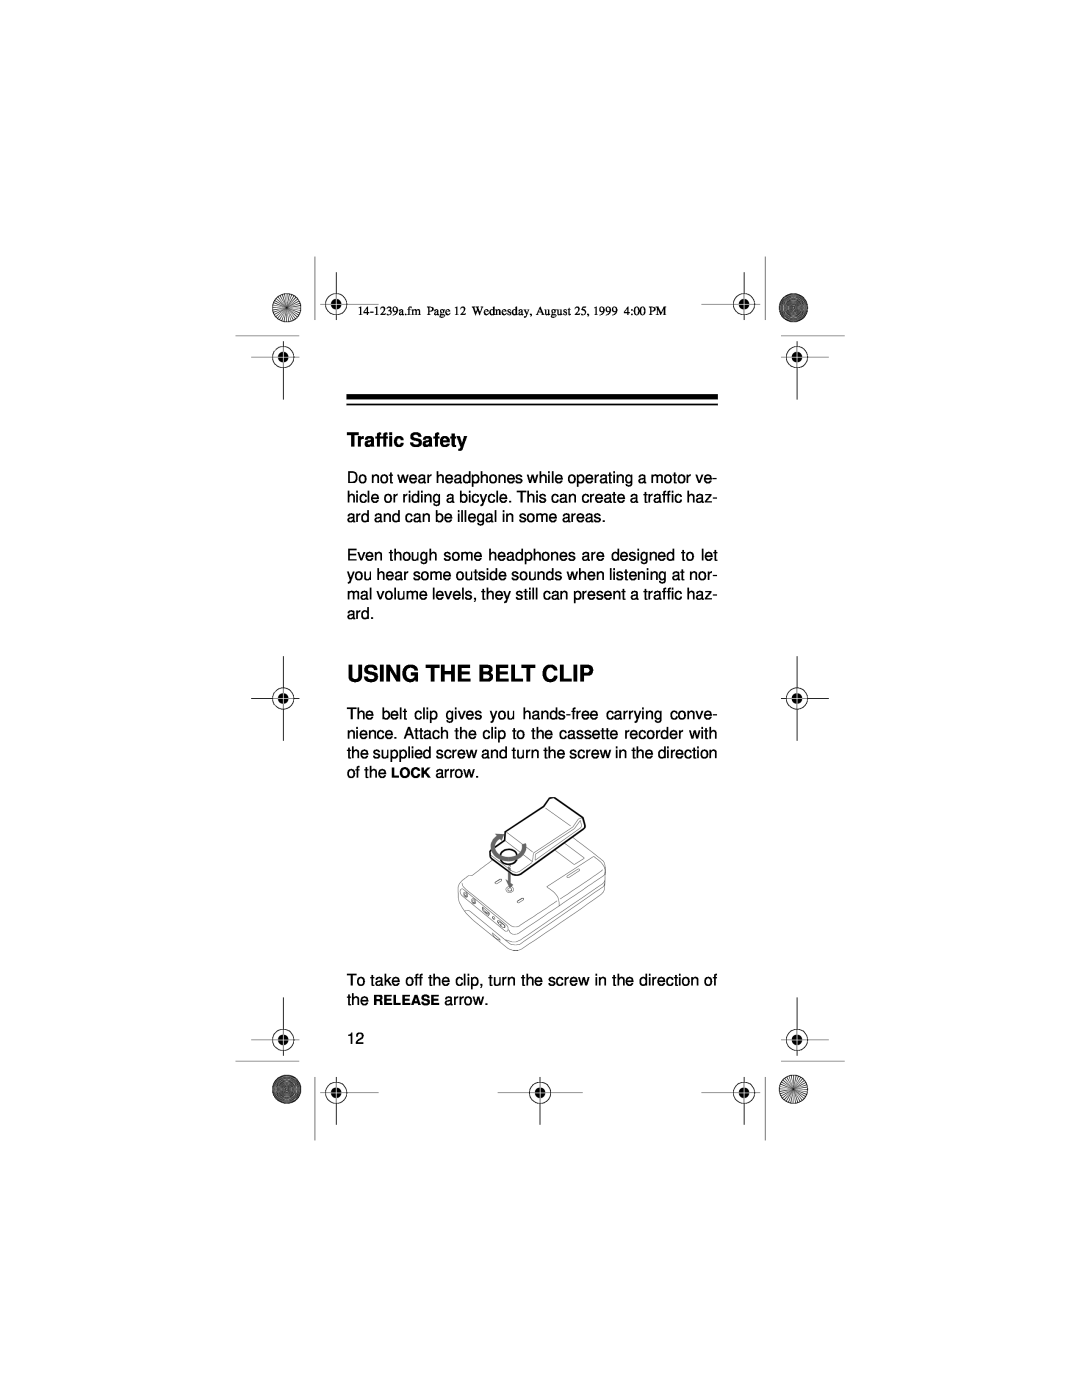 Optimus SCR-96 owner manual Using The Belt Clip, Traffic Safety 